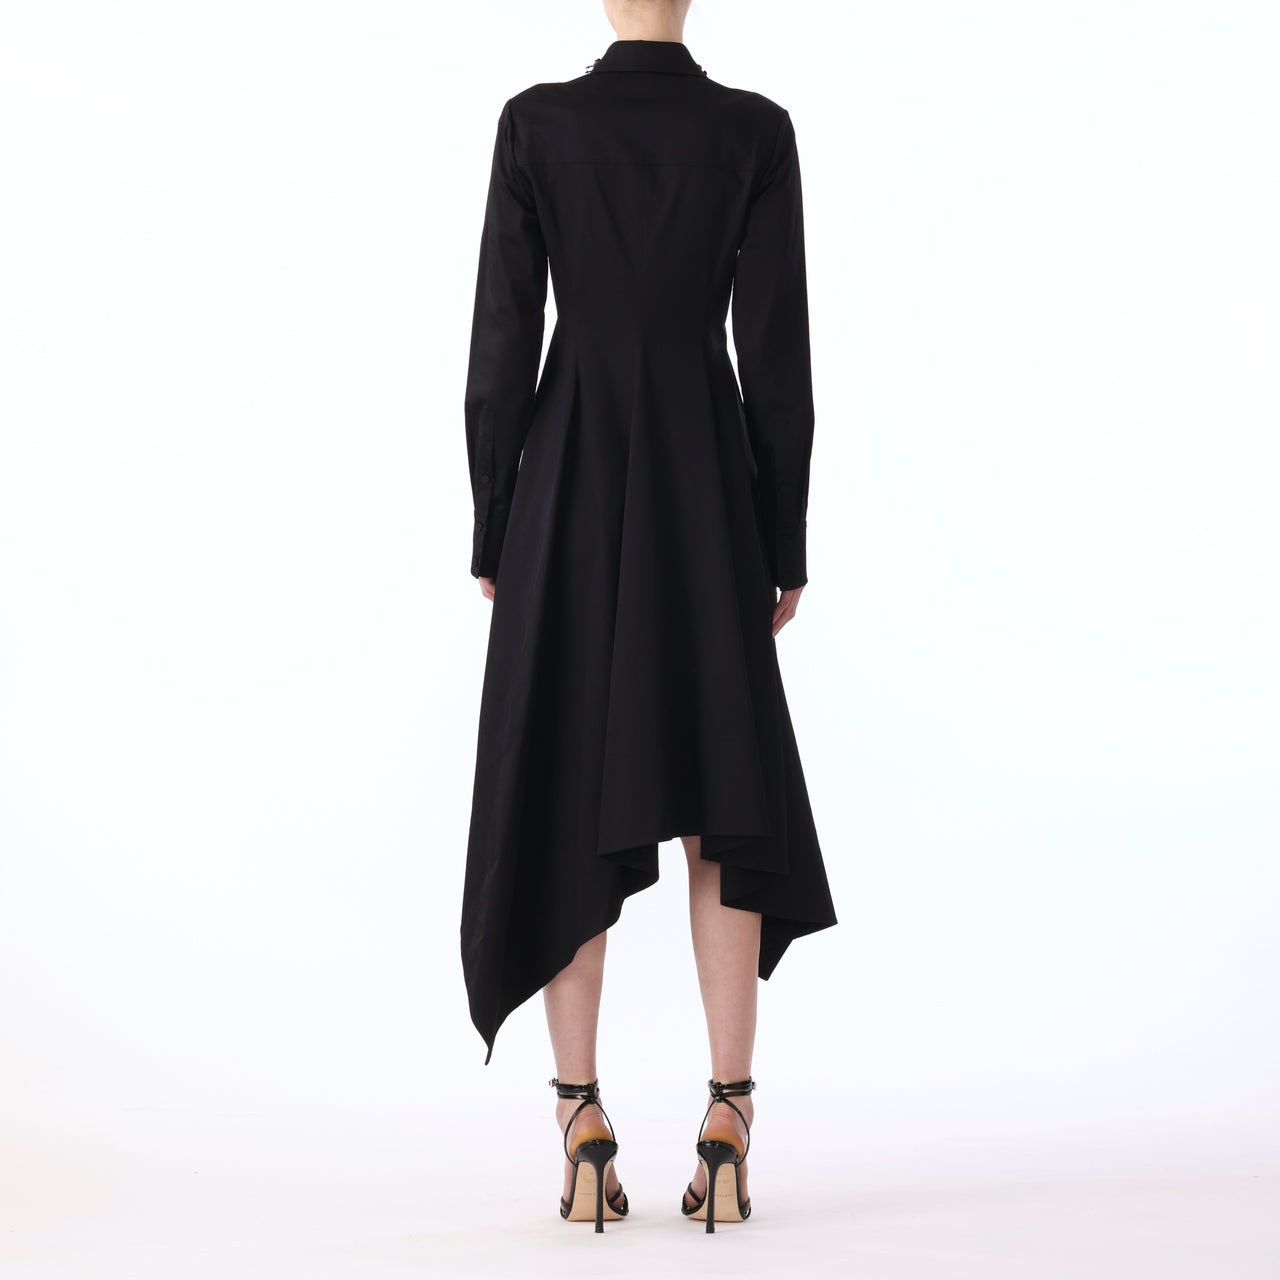 L/S ASYMMETRIC COTTON DRESS WITH EMBROIDERY COLLAR view 3